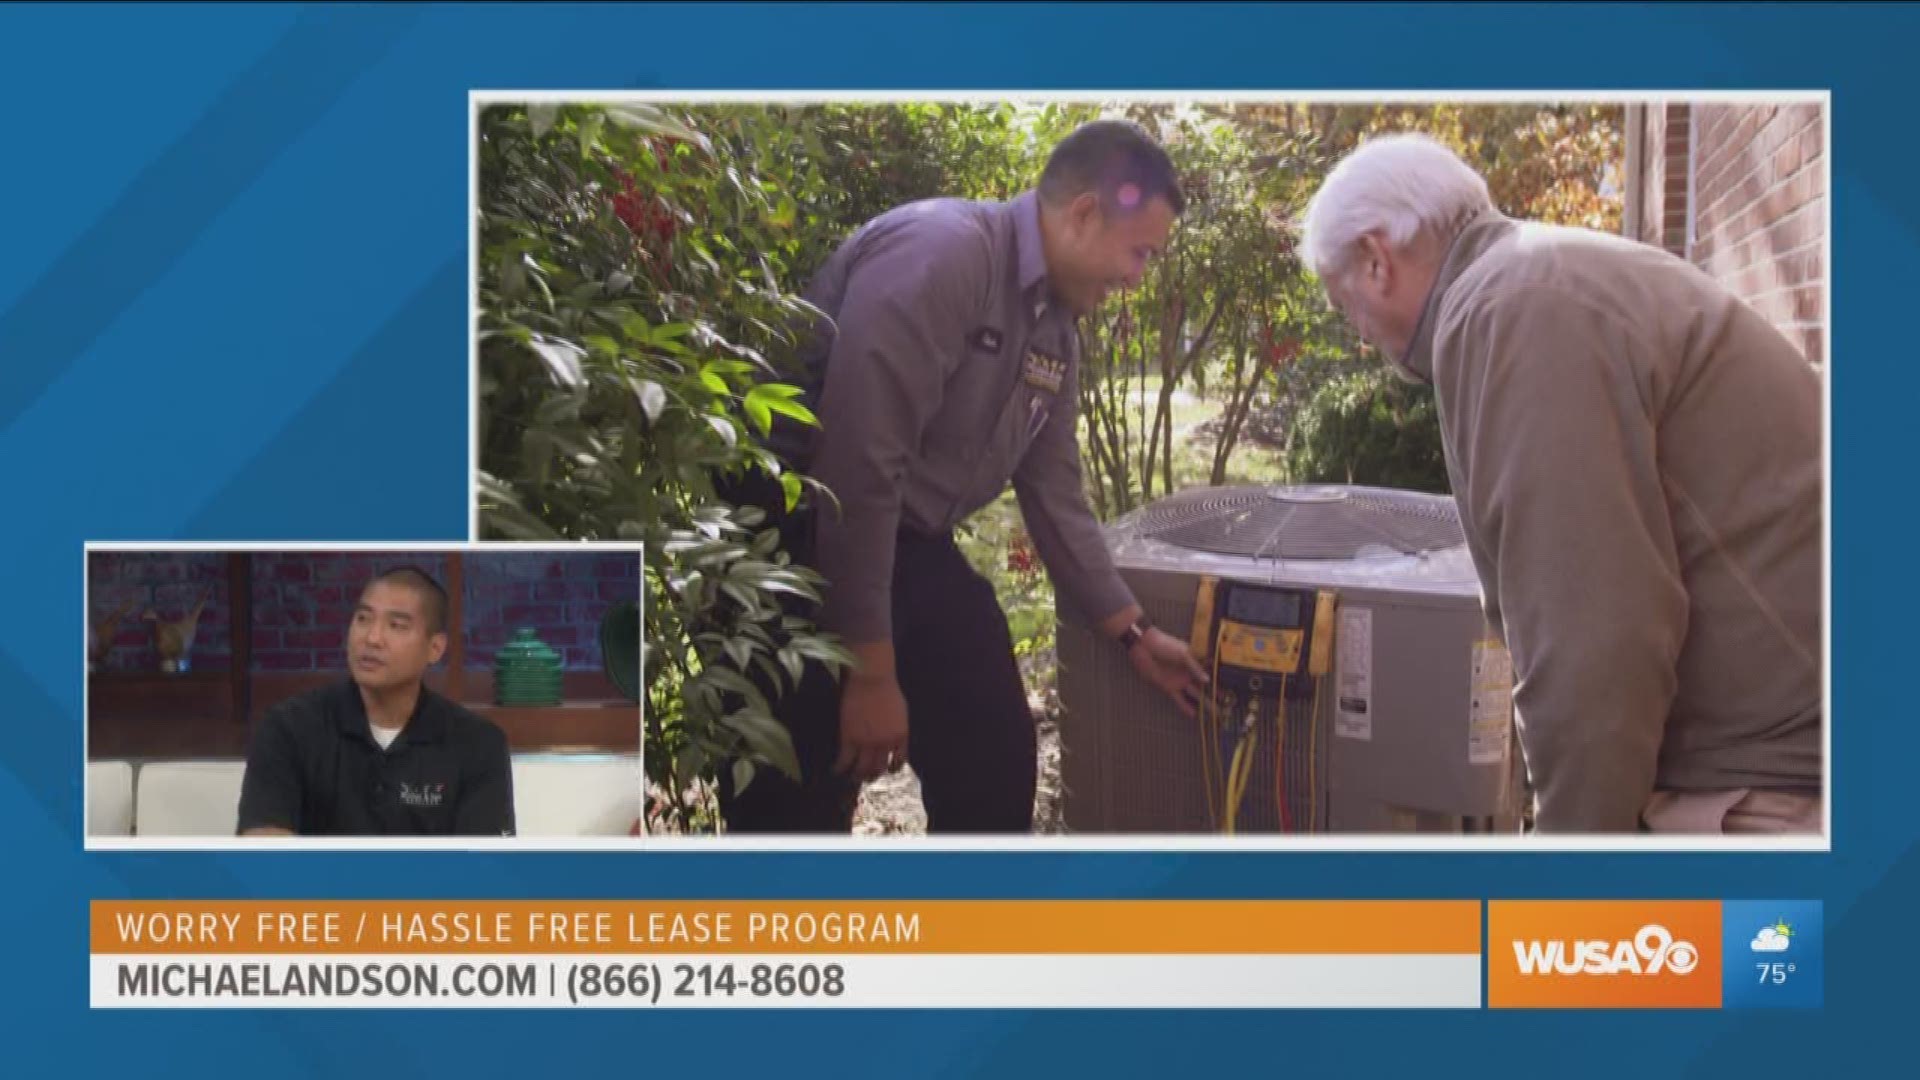 Get a new HVAC unit to keep cool this summer and make no payments for 3 months. After you that you pay a low monthly payment.  Stay cool this summer and never worry about service or unexpected repairs bills again!  Call (866) 214-8608 or visit MichaelAndSon.com.  This segment was sponsored by Michael and Son.